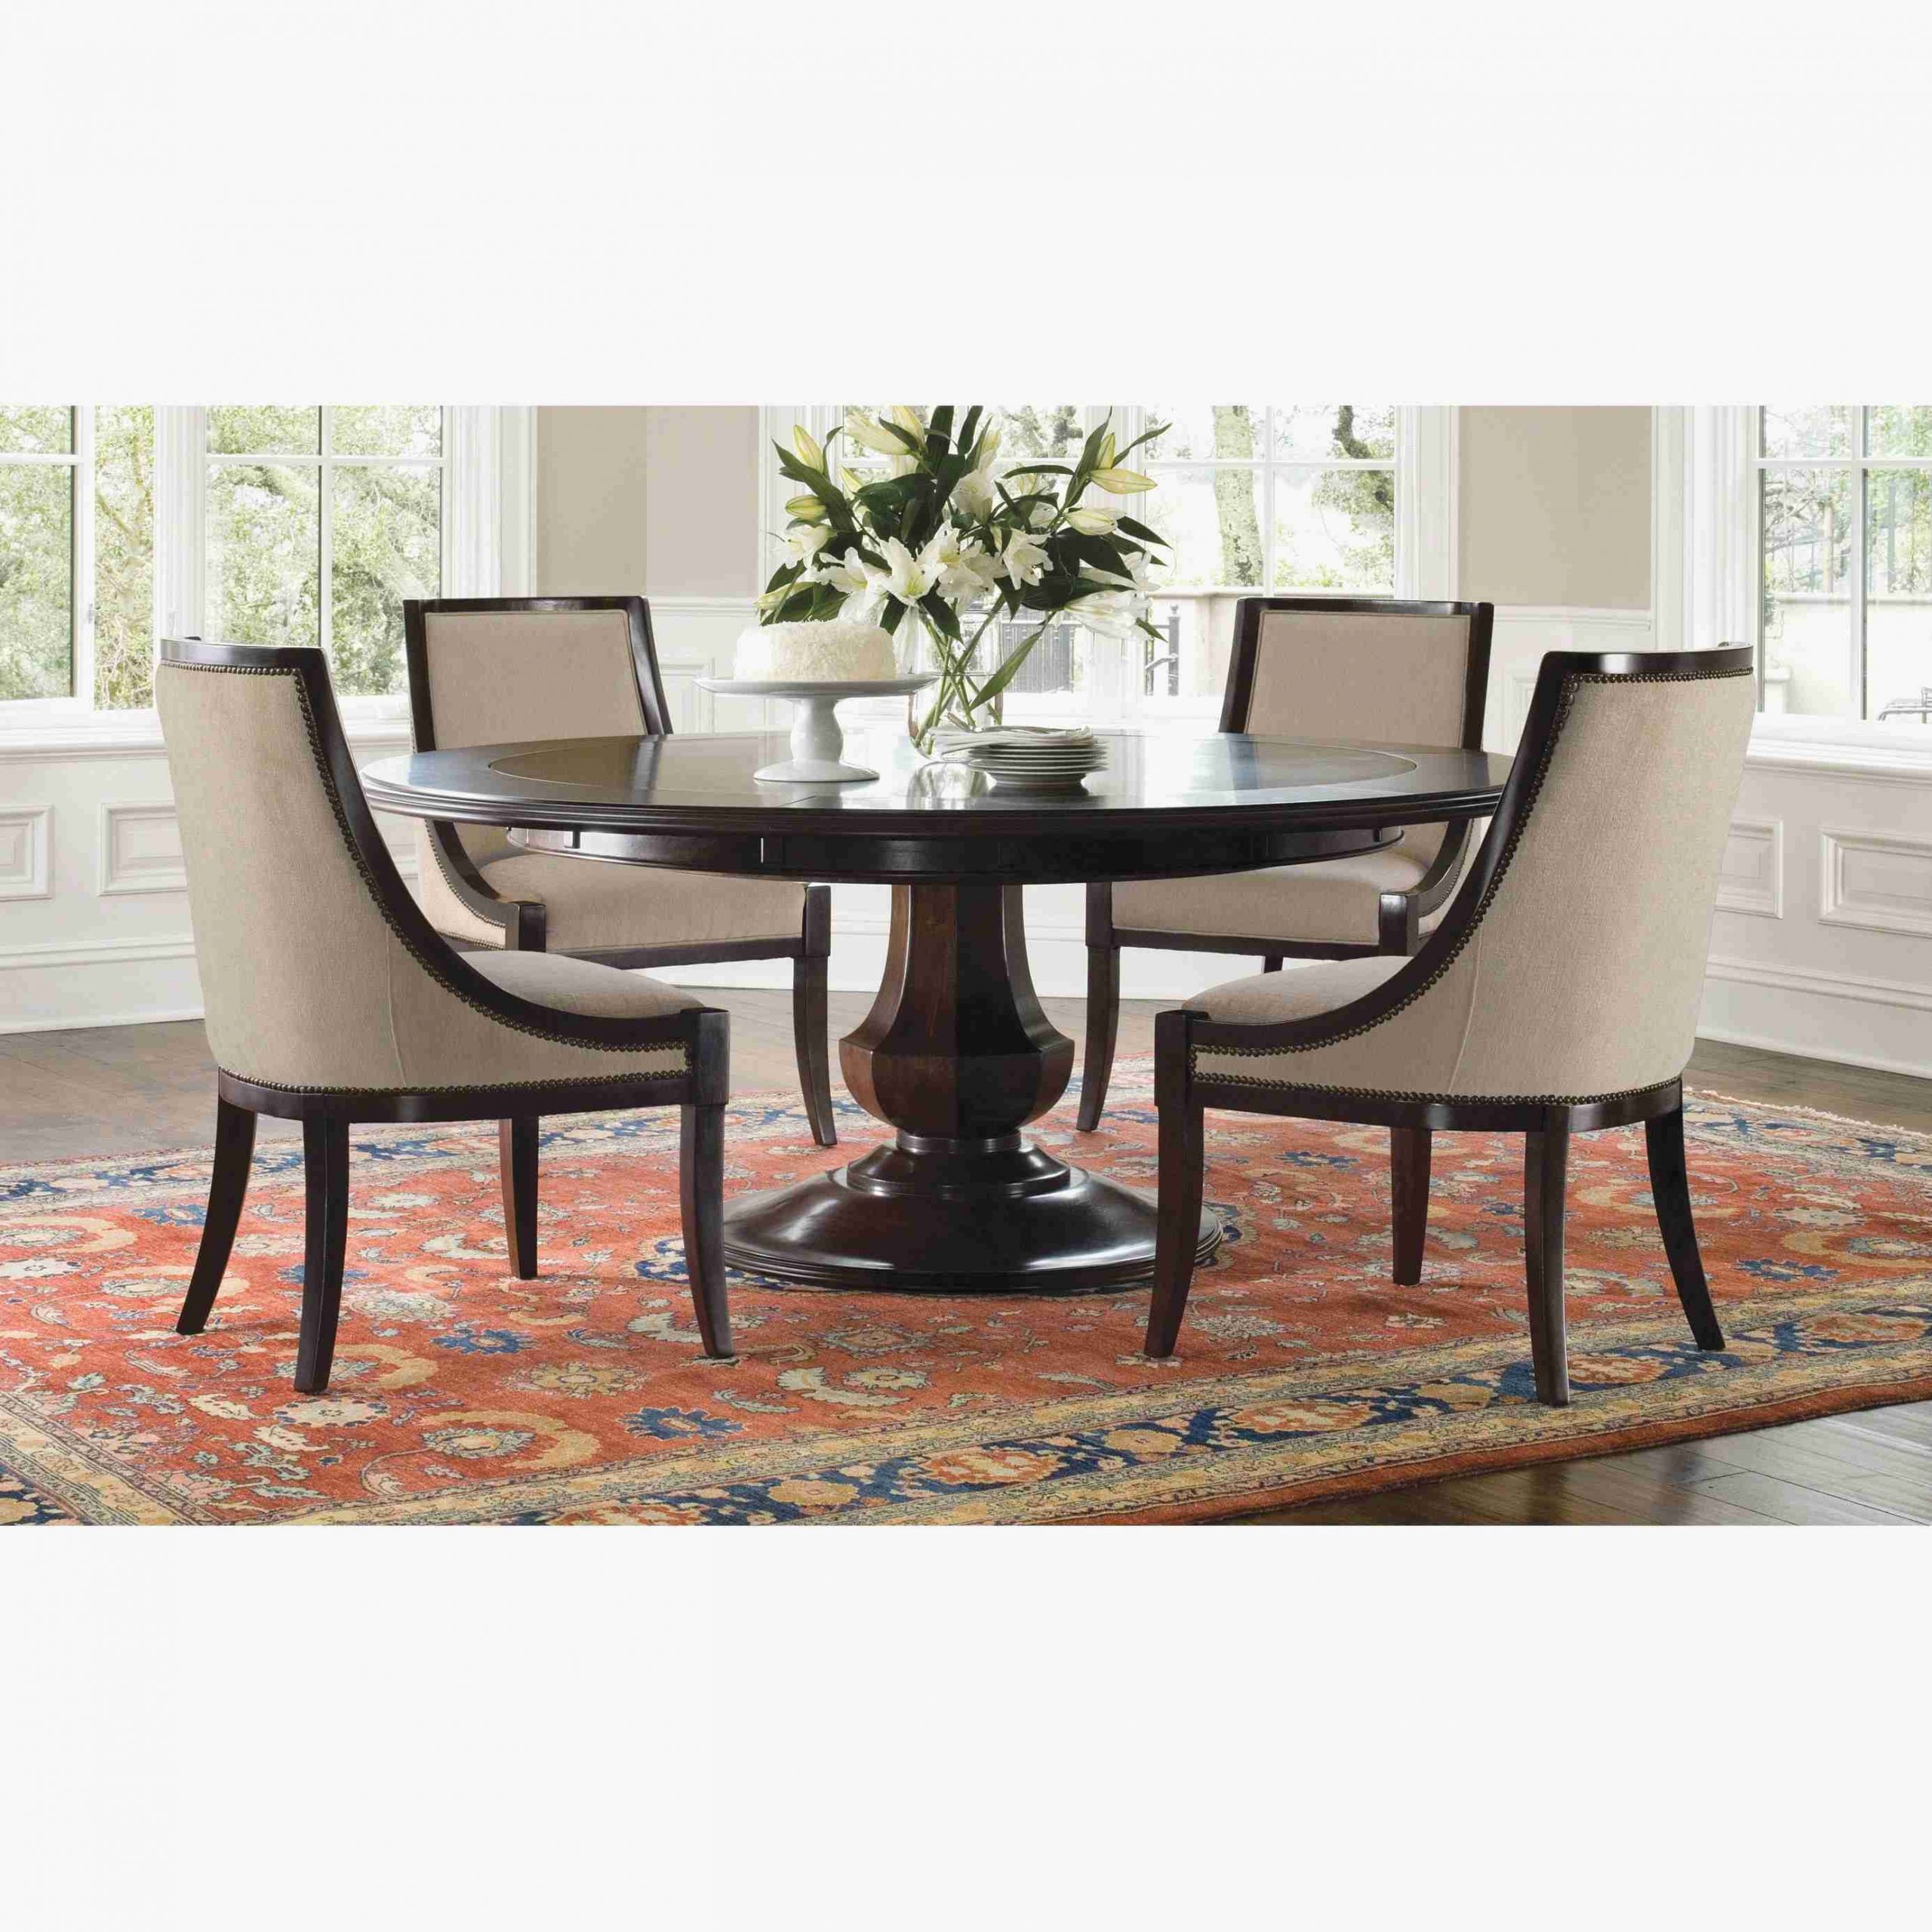 Creative Jcpenney Dining Room Furniture Ideas in 2022